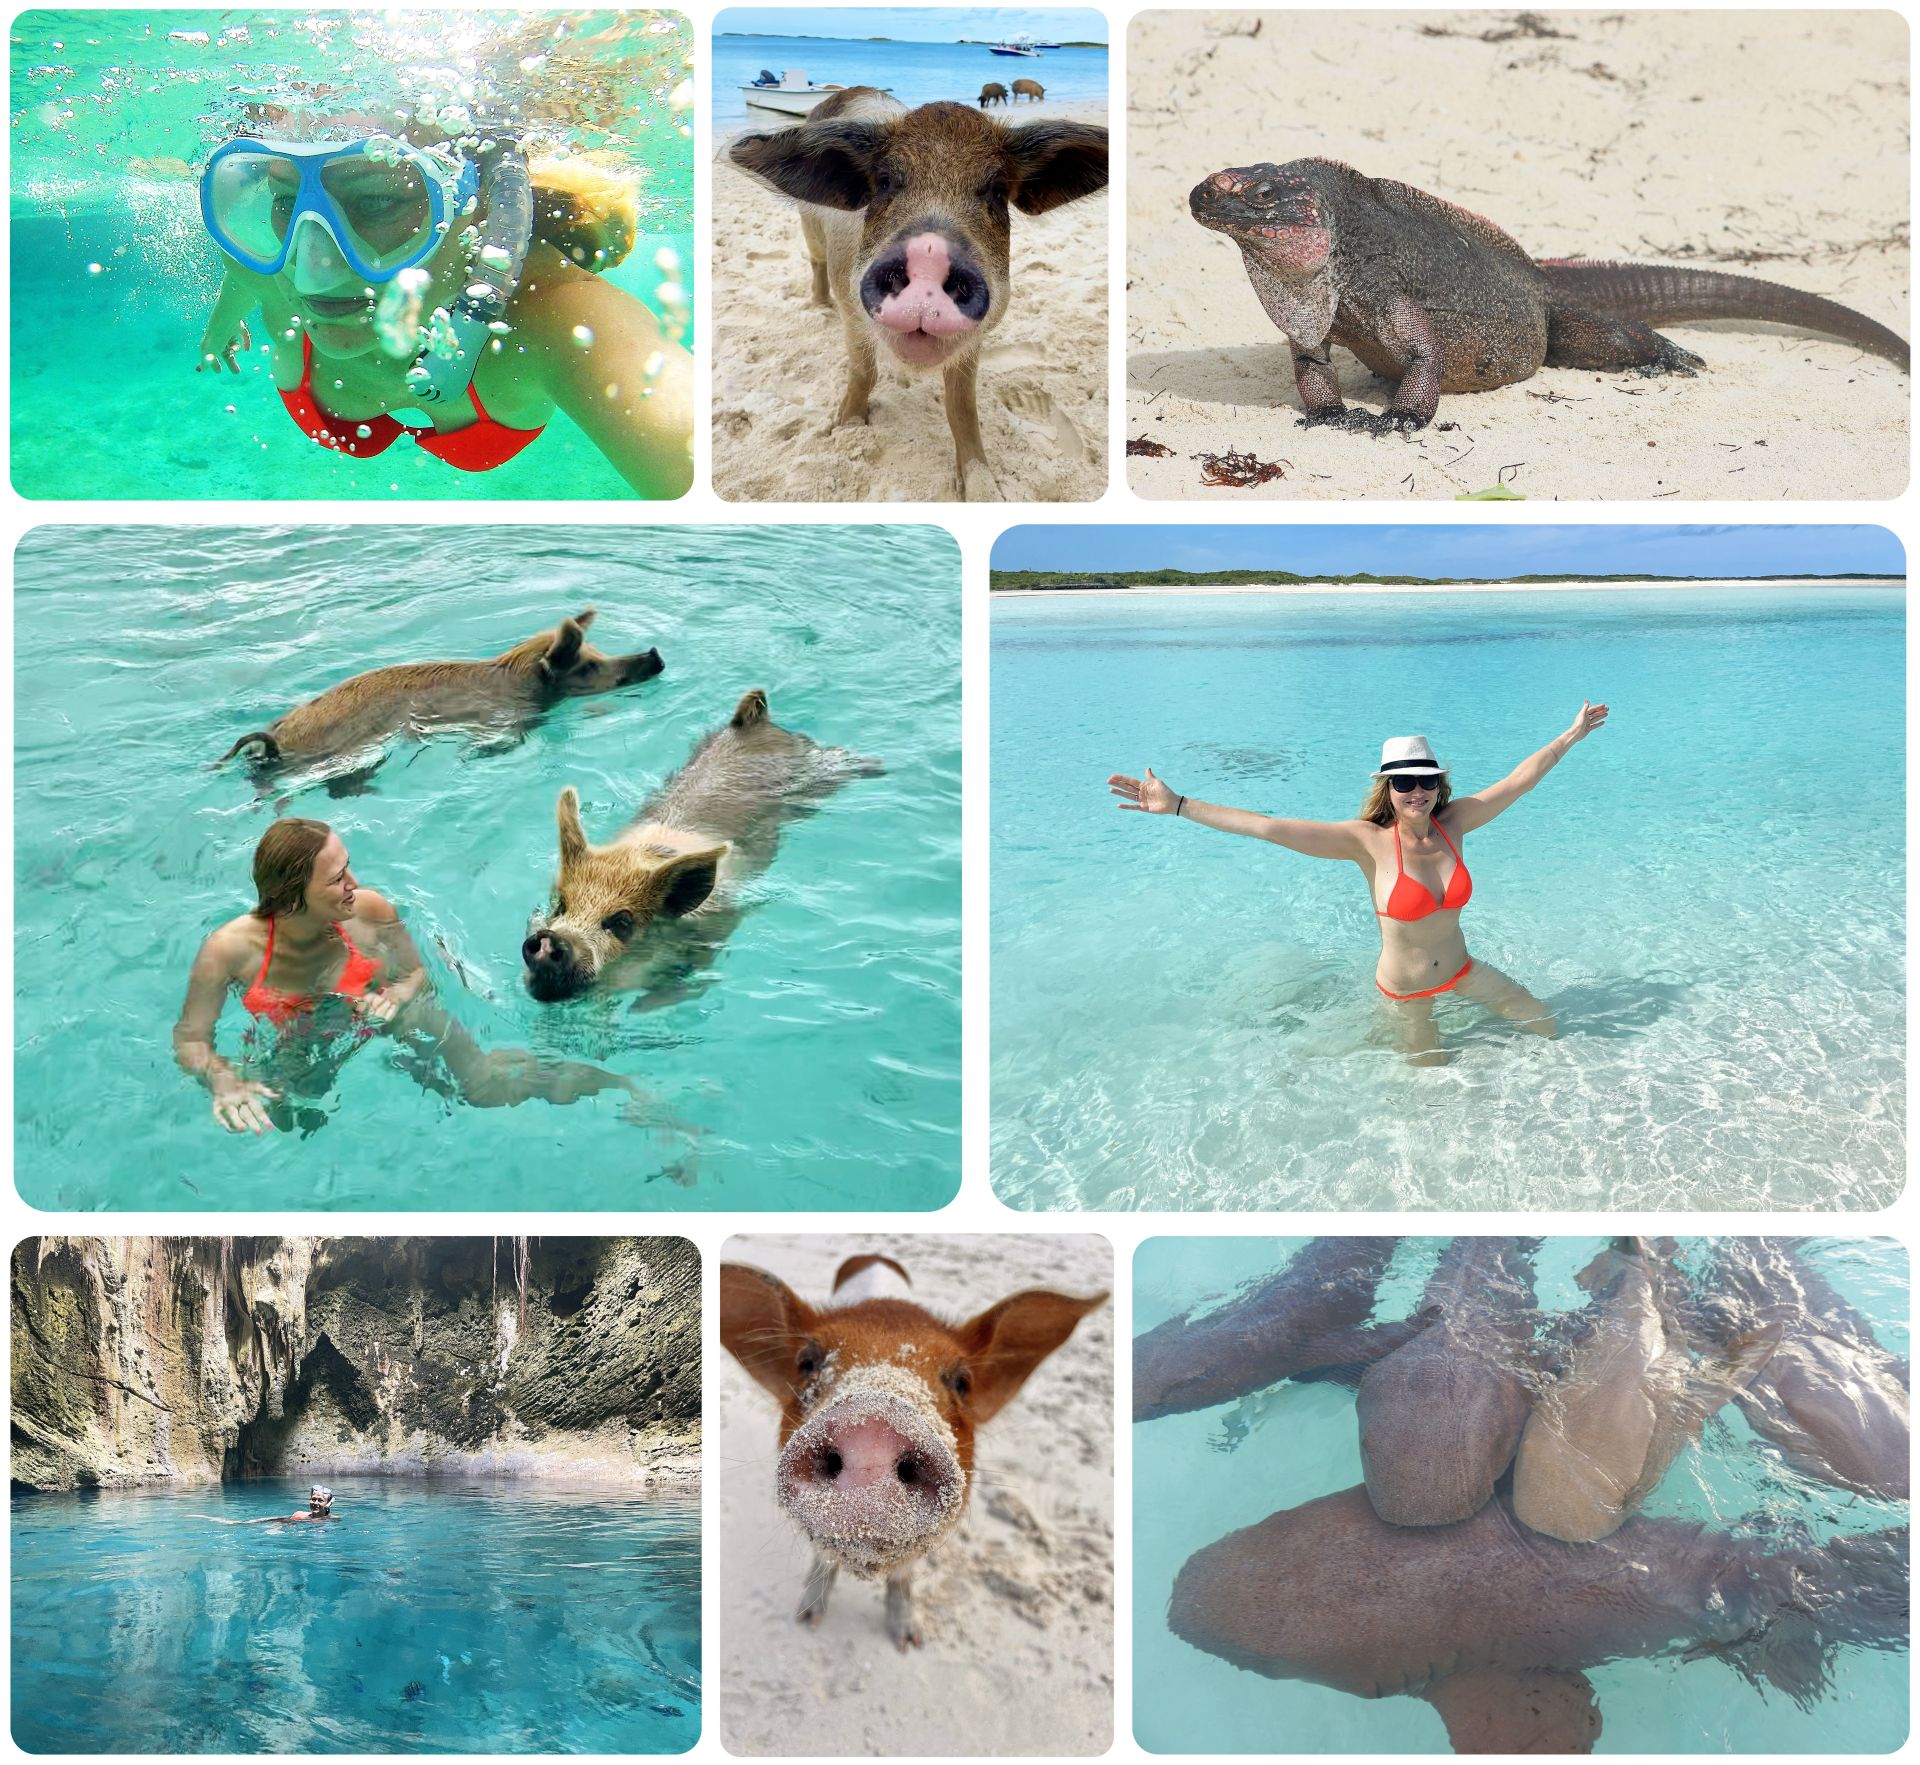 Sharks, swimming pigs, and iguanas: An Unforgettable Day Excursion in the Bahamas